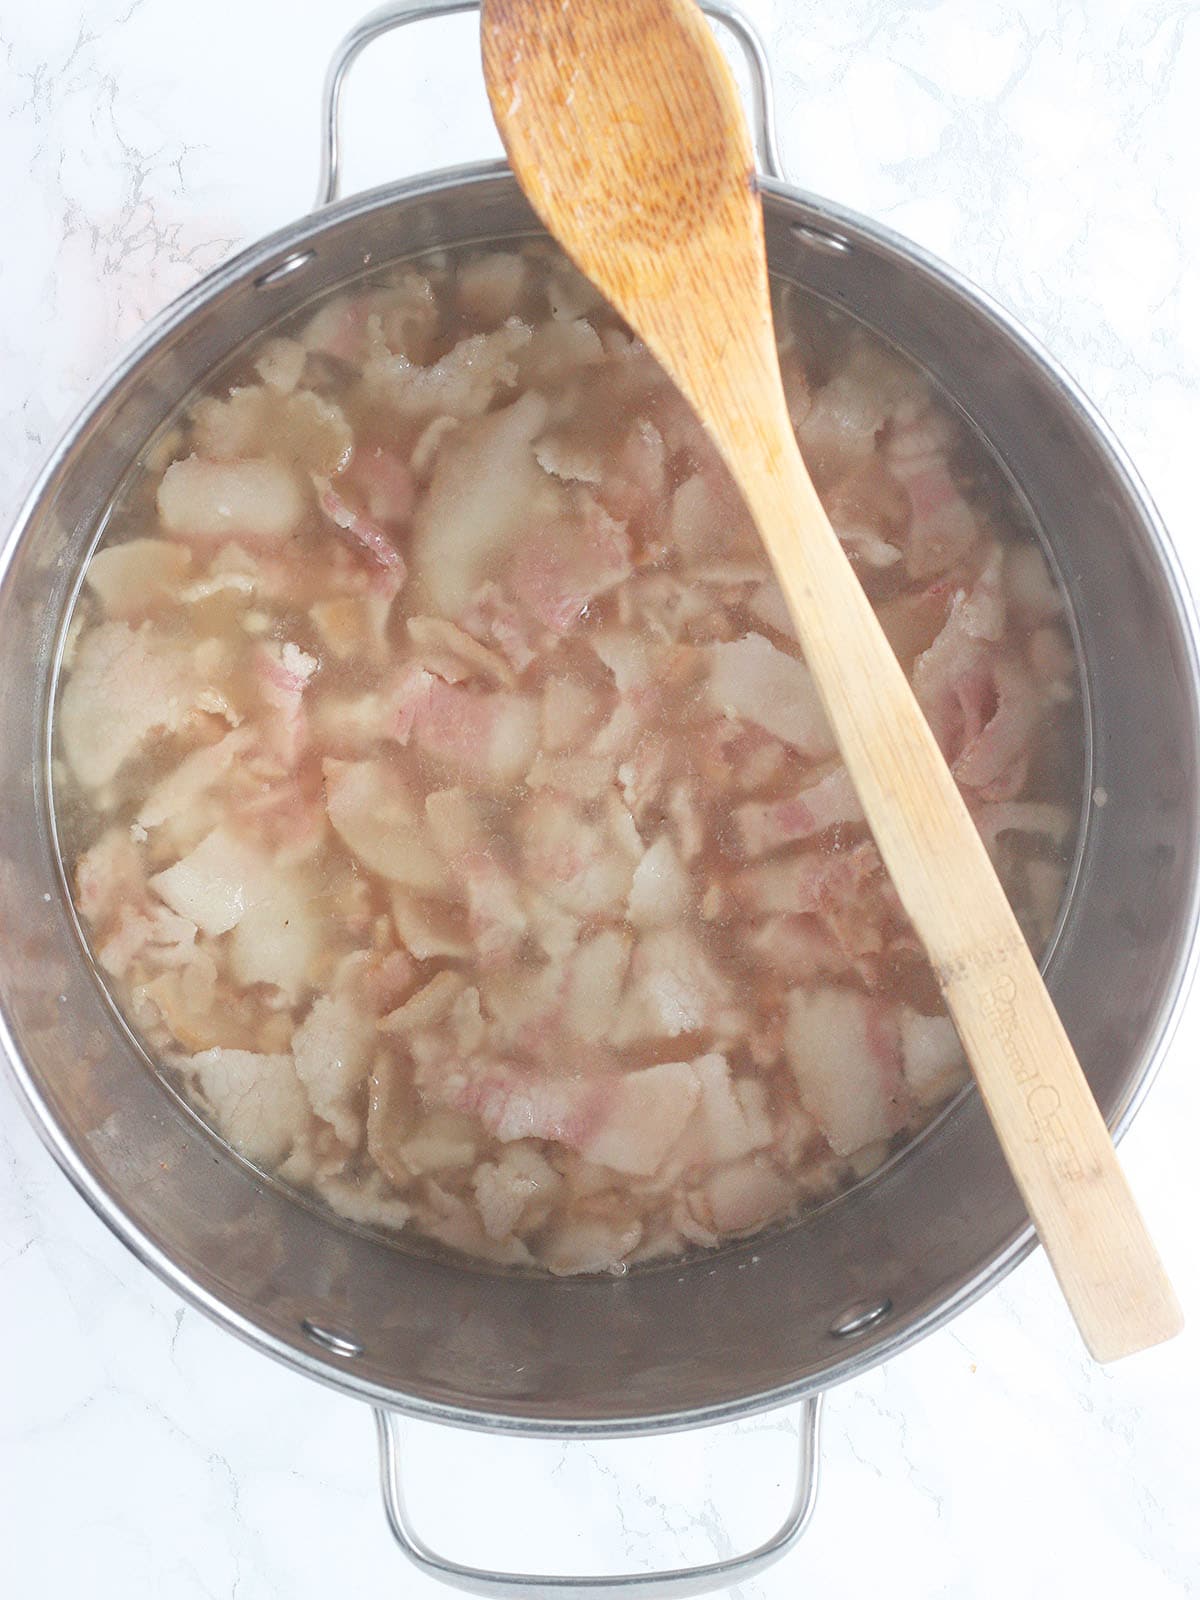 Cooked salt pork after the water has been added to the pot.